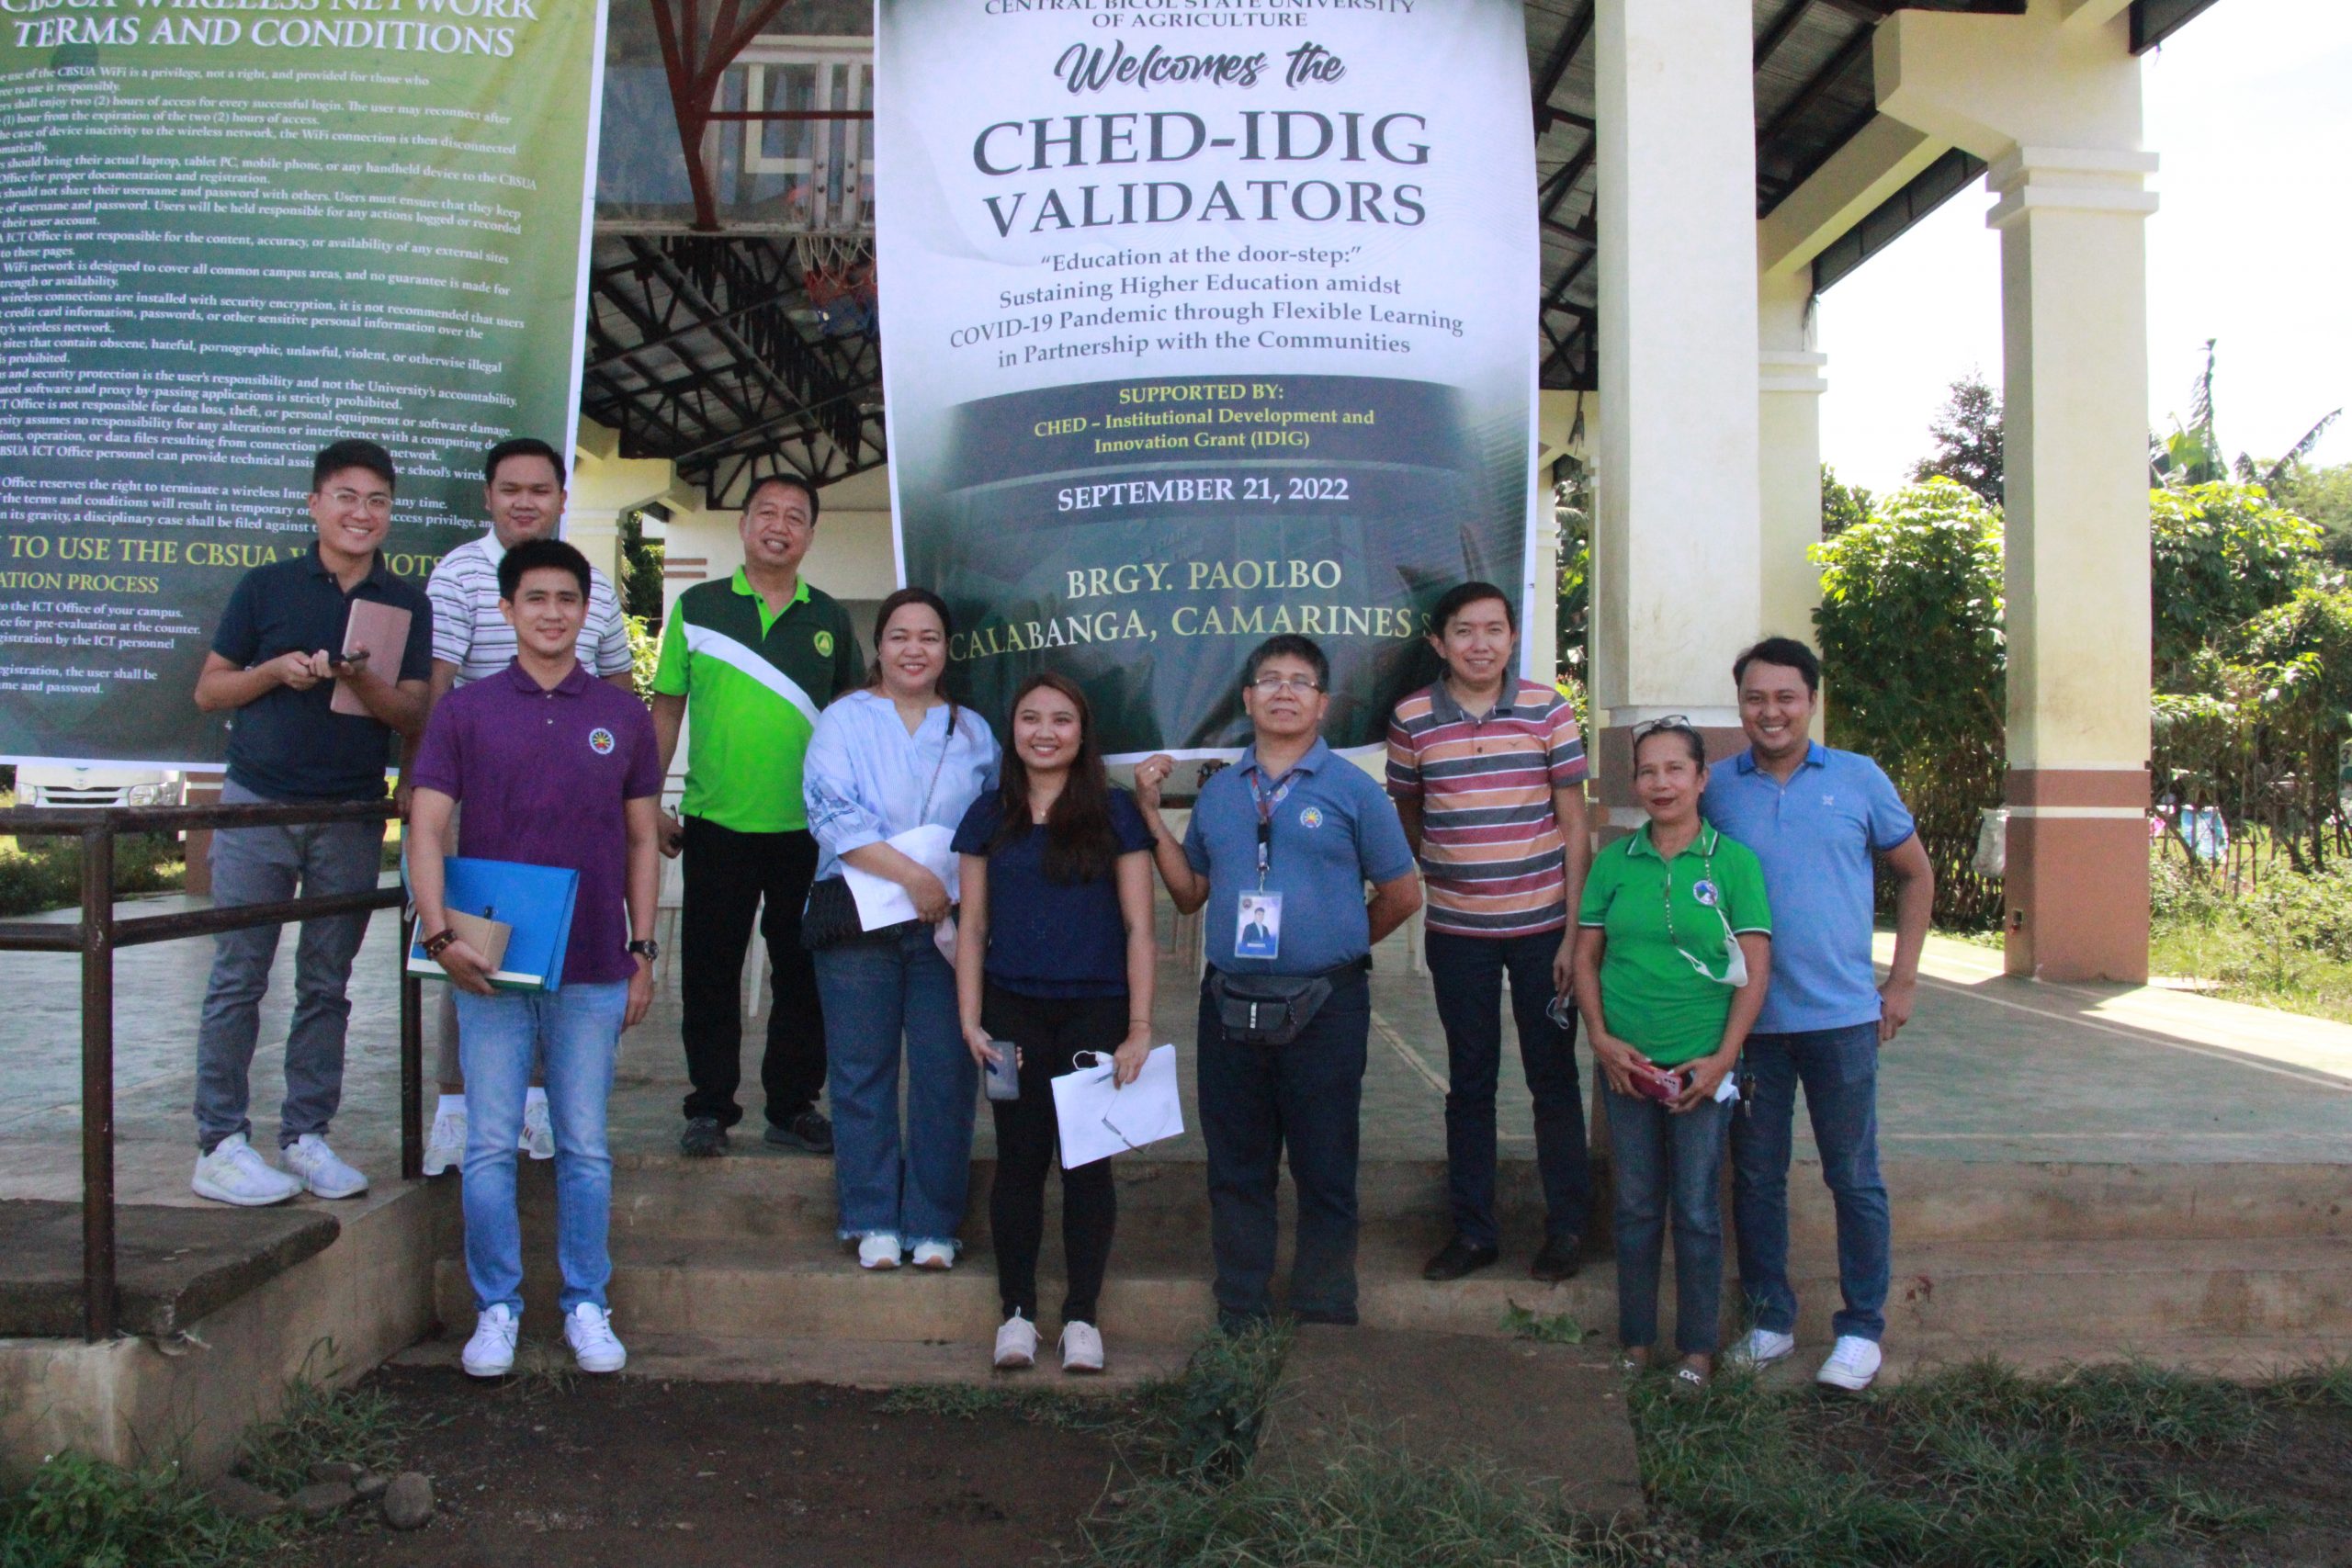 CBSUA FREE WIFI PROJECTS UNDERGO CHED-IDIG ONSITE VALIDATION